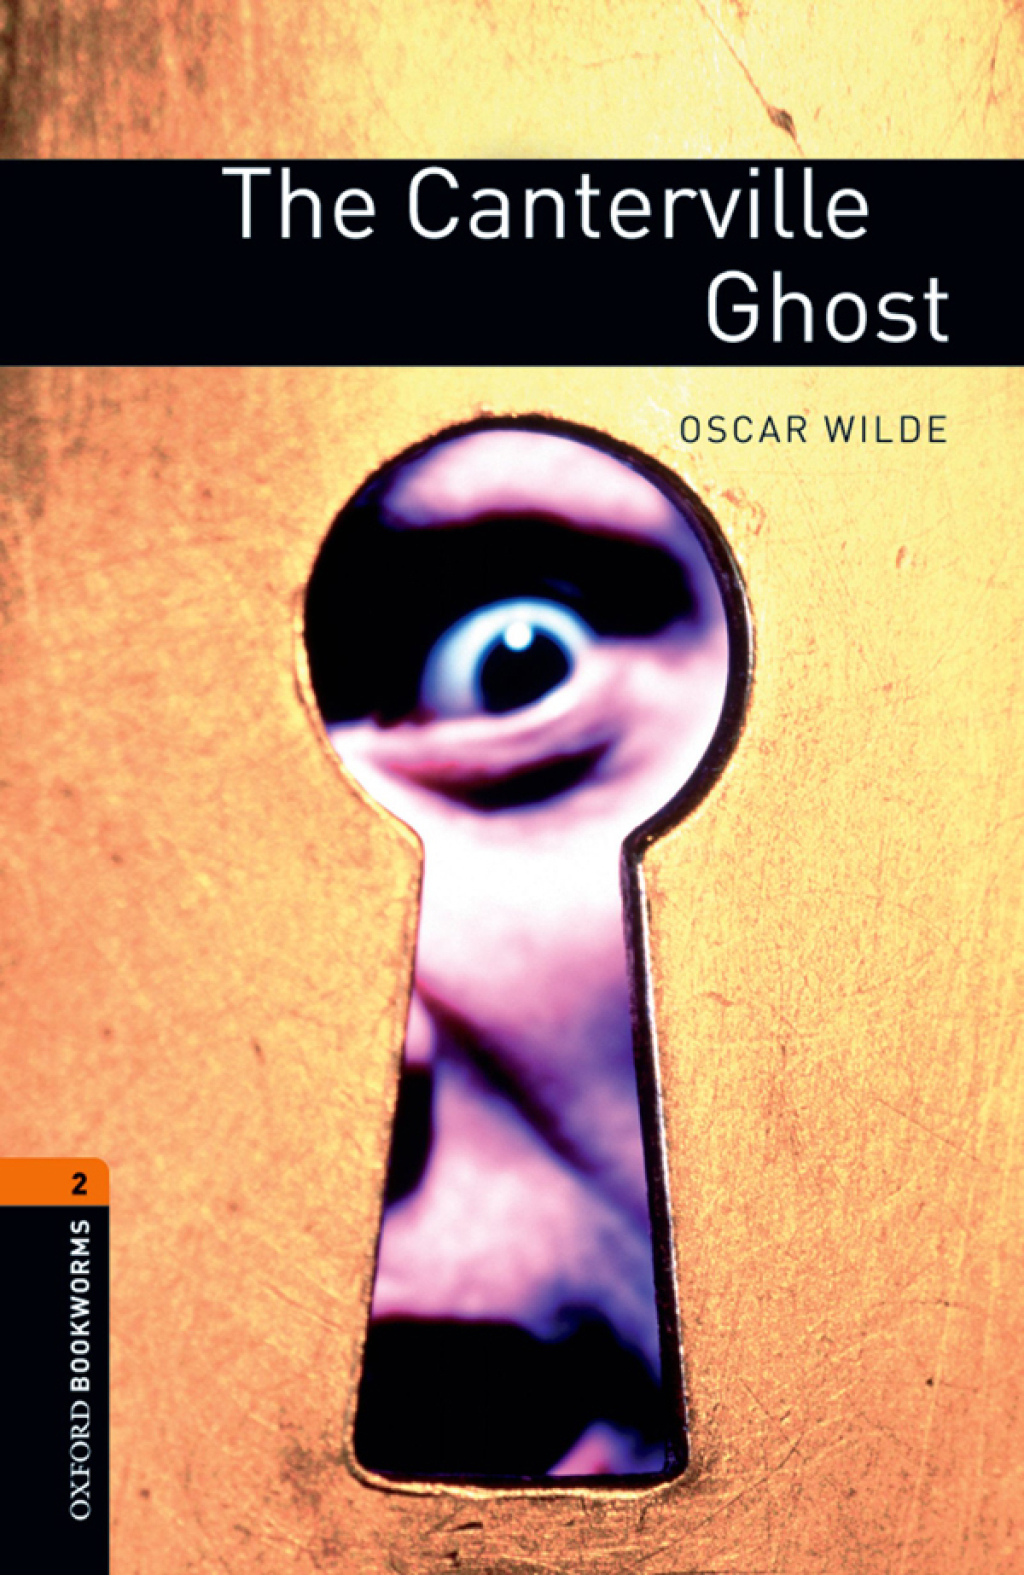 The Canterville Ghost Level 2 Oxford Bookworms Library - 3rd Edition (eBook Rental)